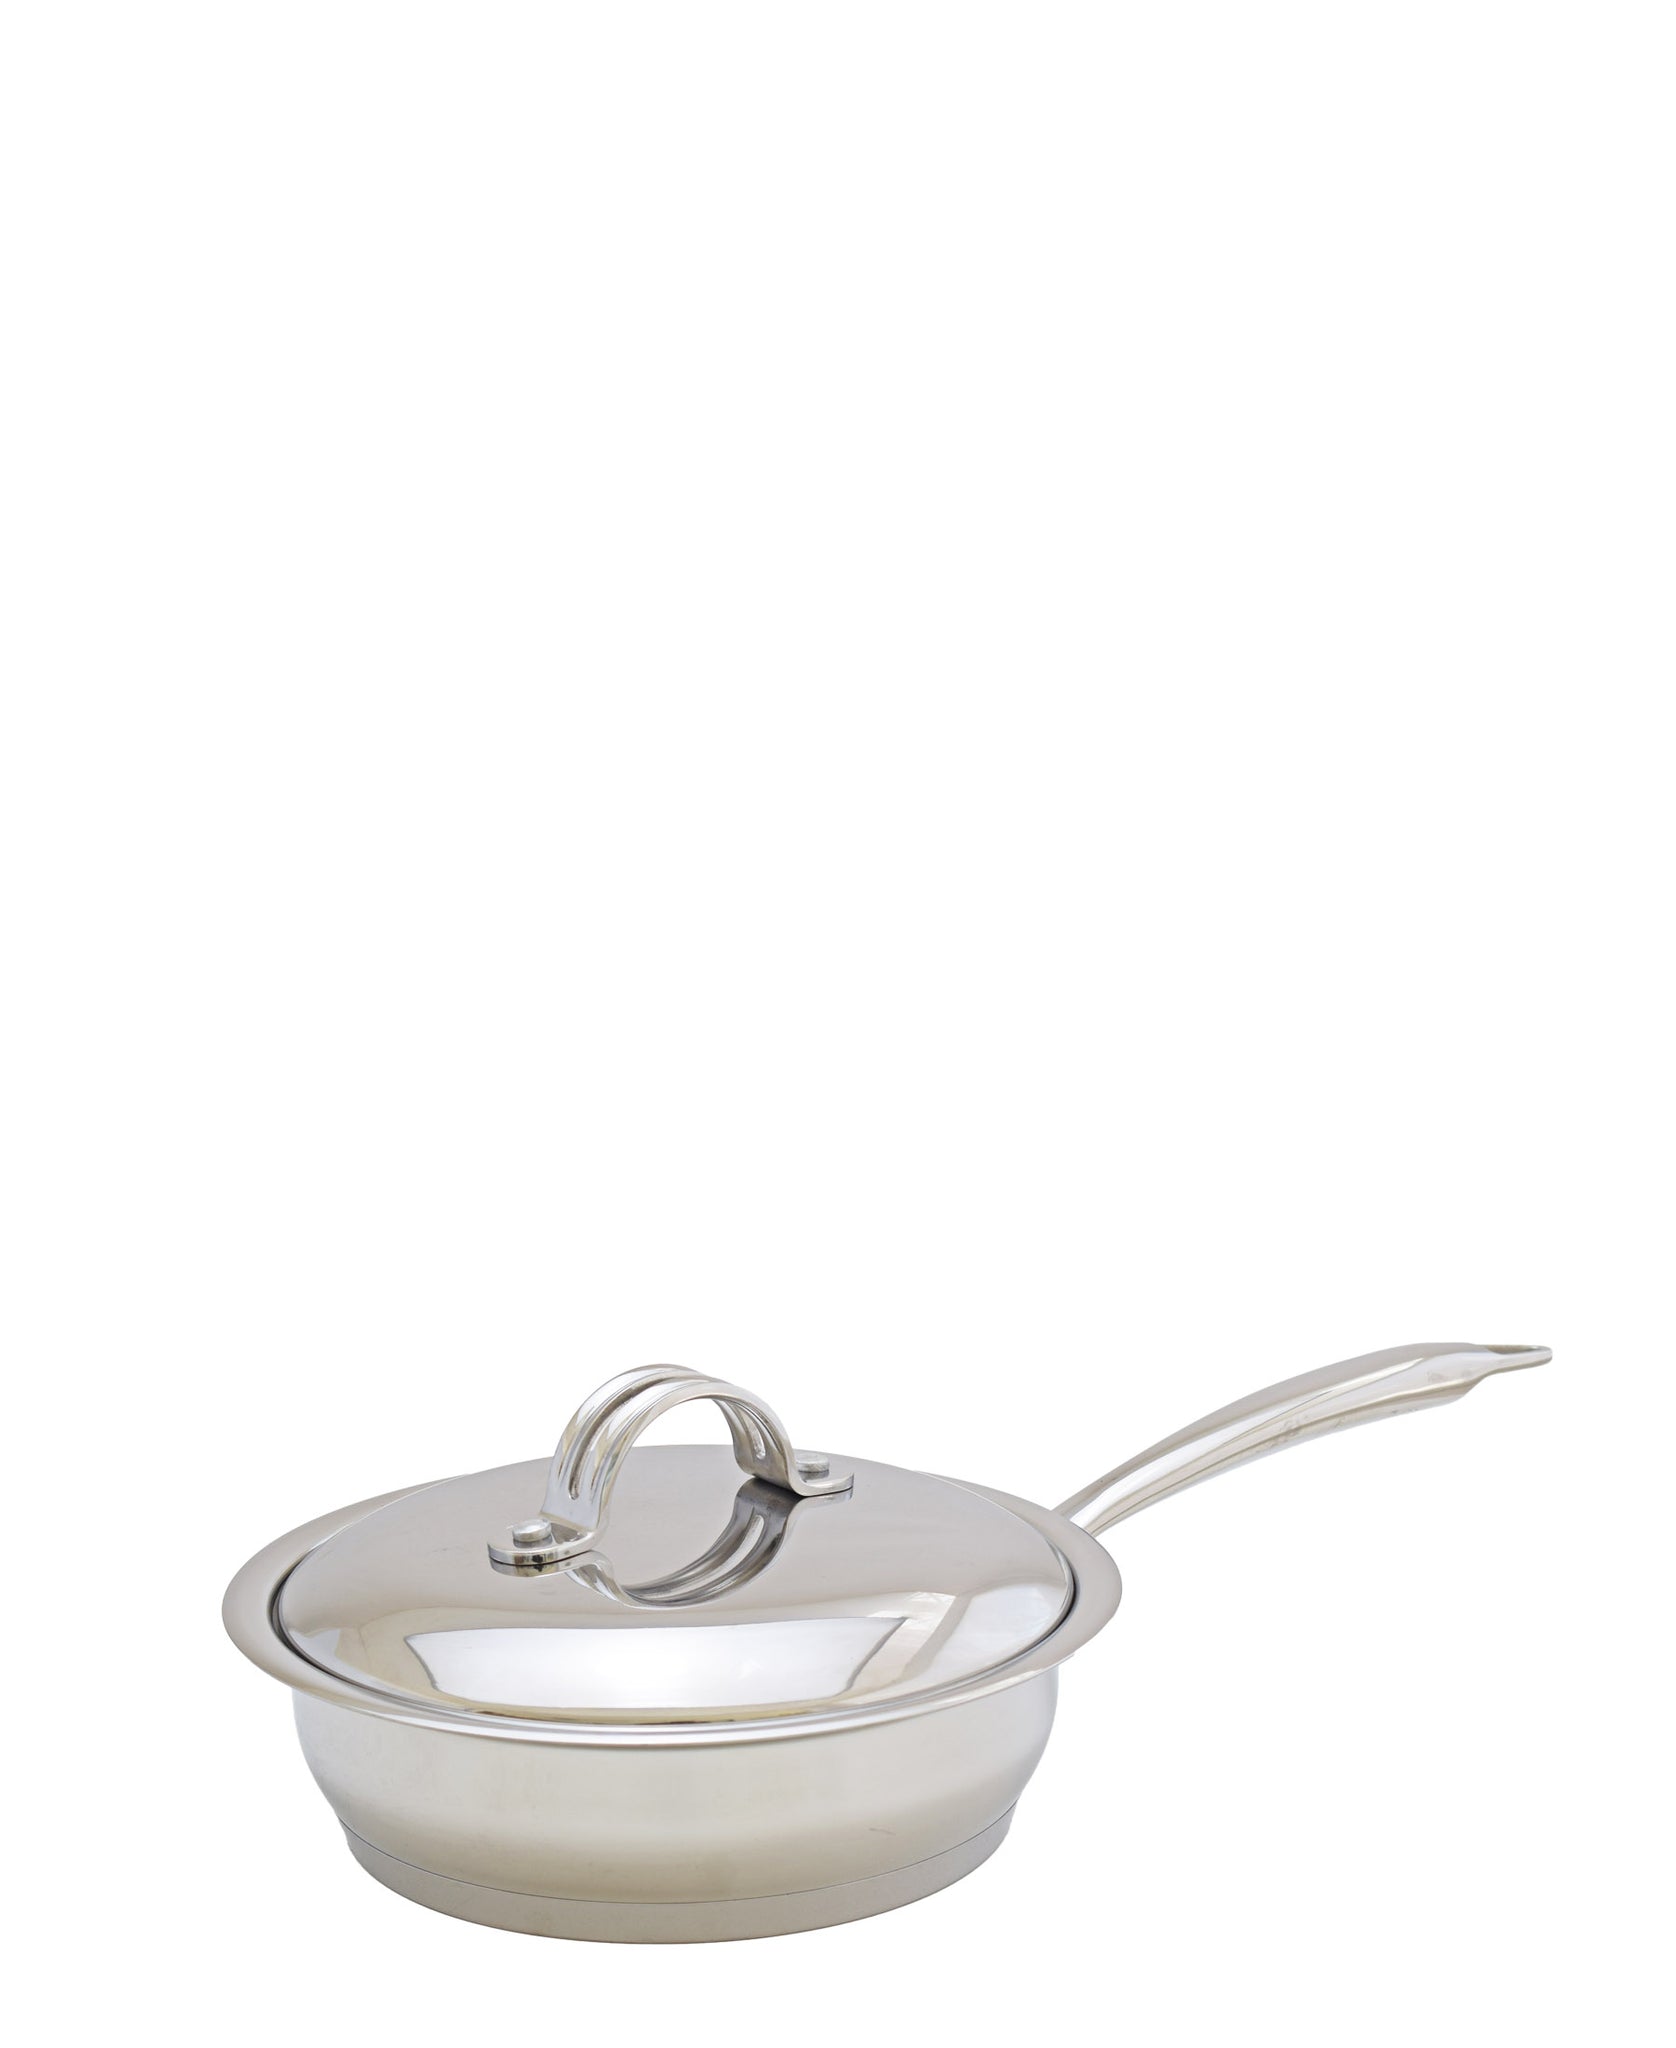 Tez 20cm Fry Pan With Lid - Silver